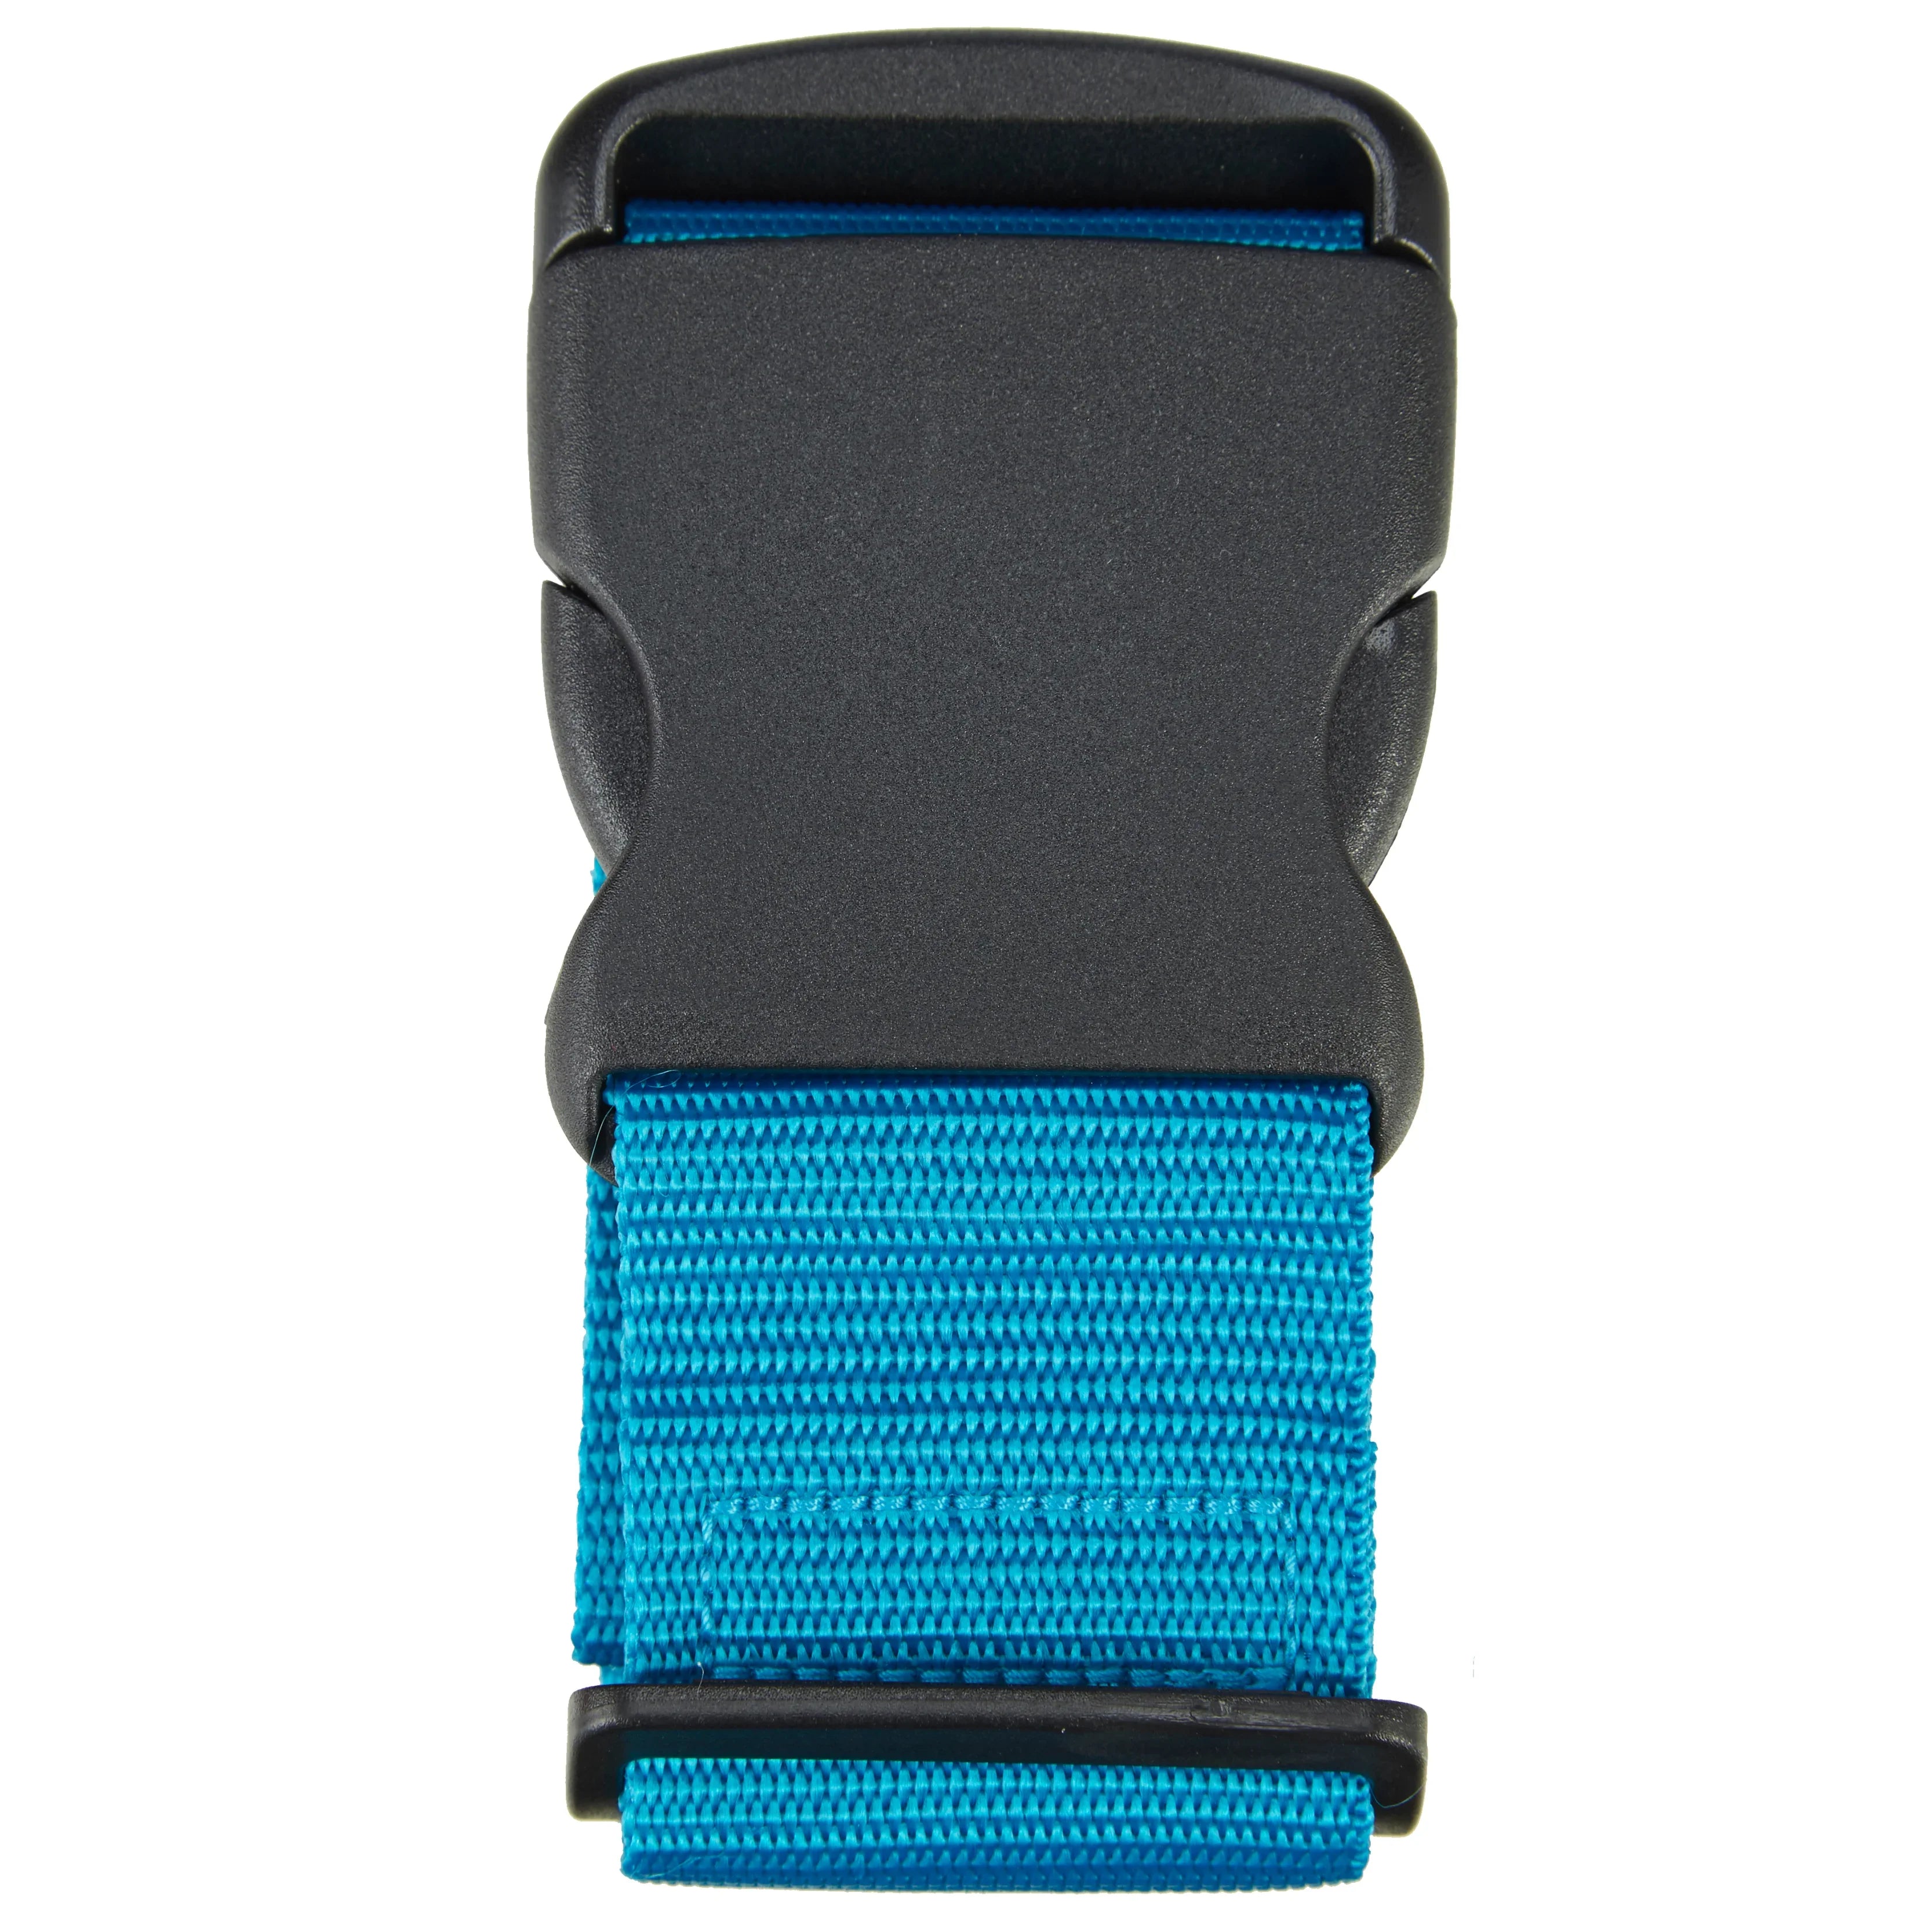 d&n Travel Accessories luggage strap - turquoise